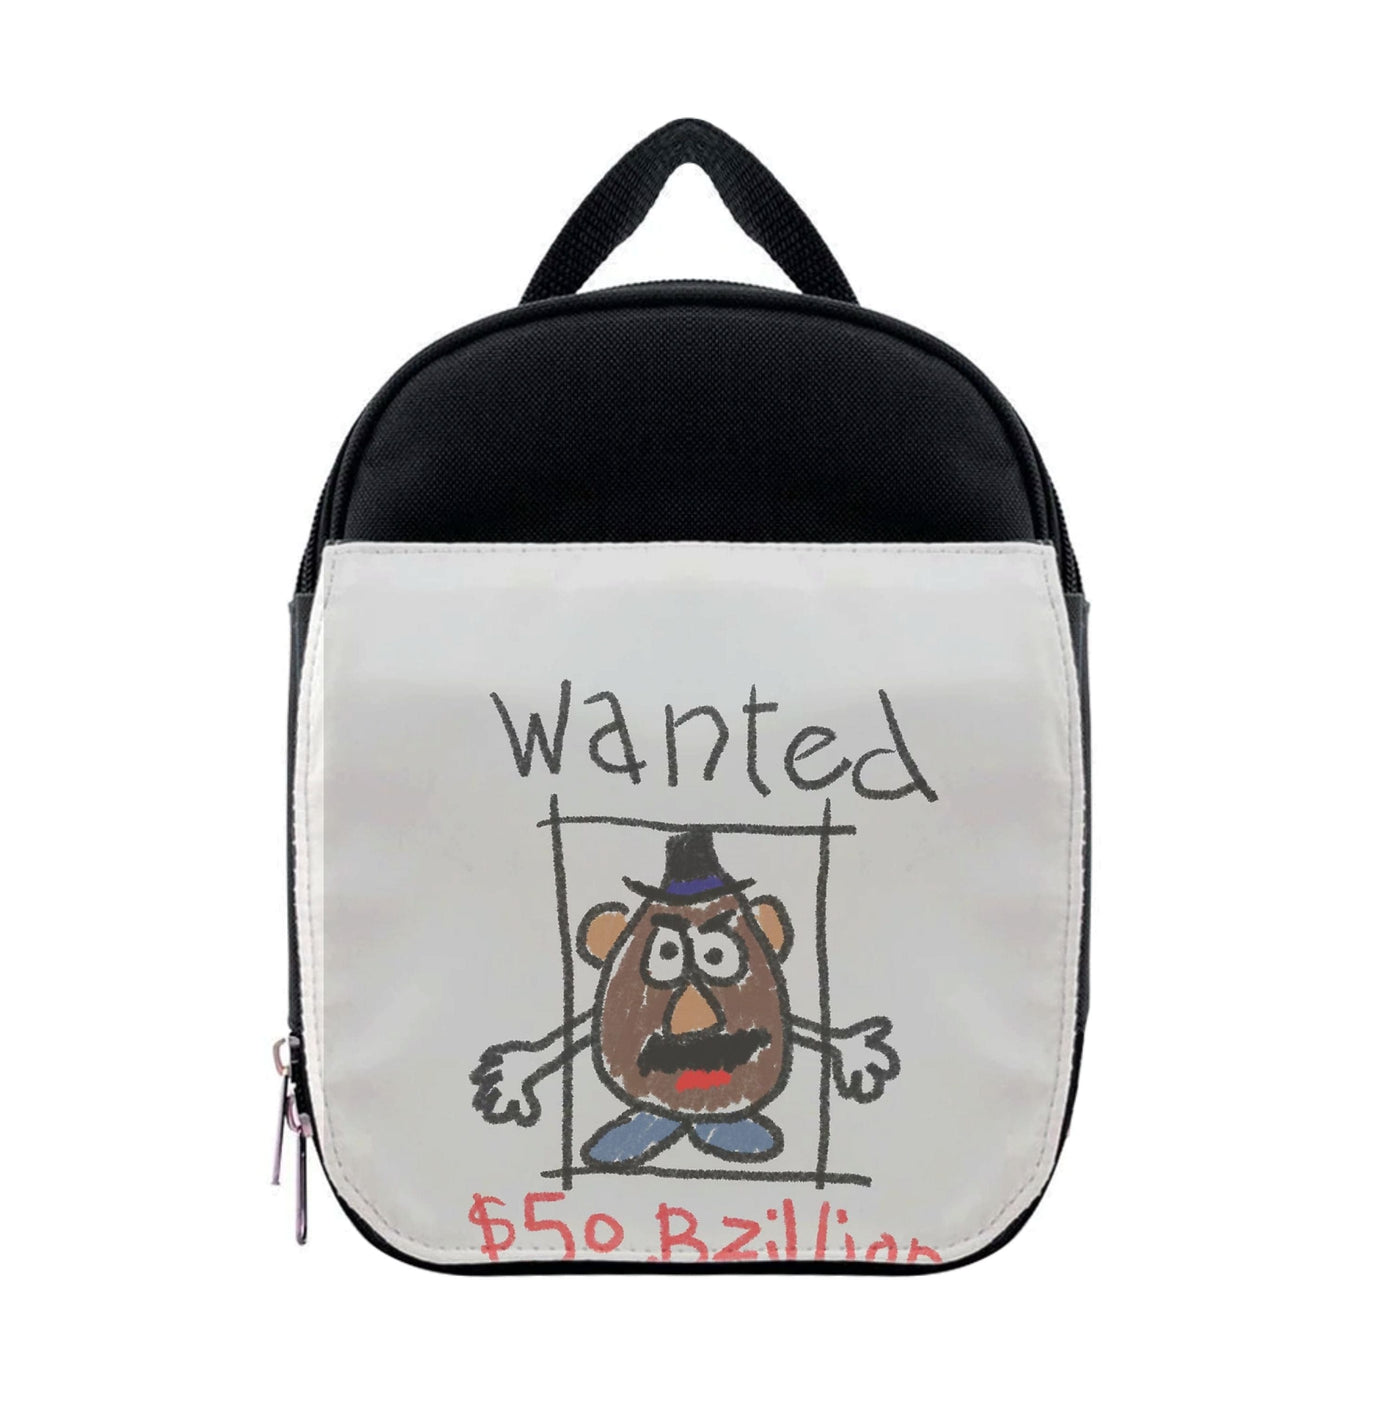 Mr Potato Head - Wanted Toy Story Lunchbox